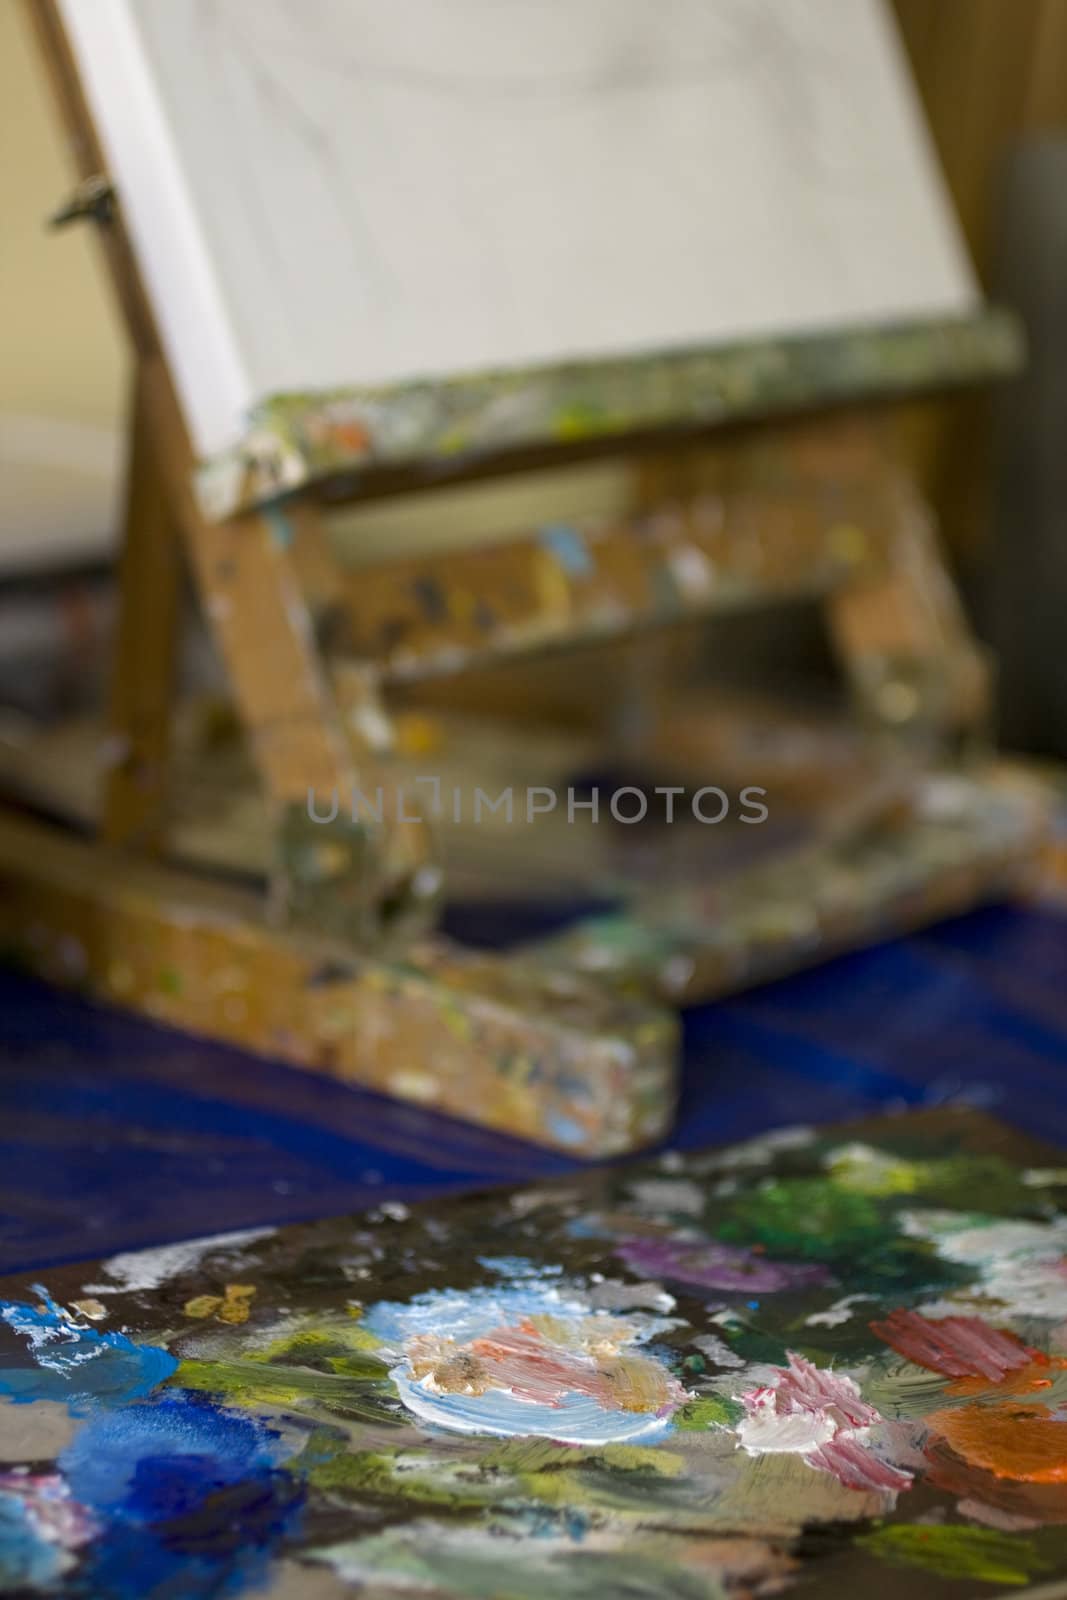 Atelier. Palette with colors, easel in the background